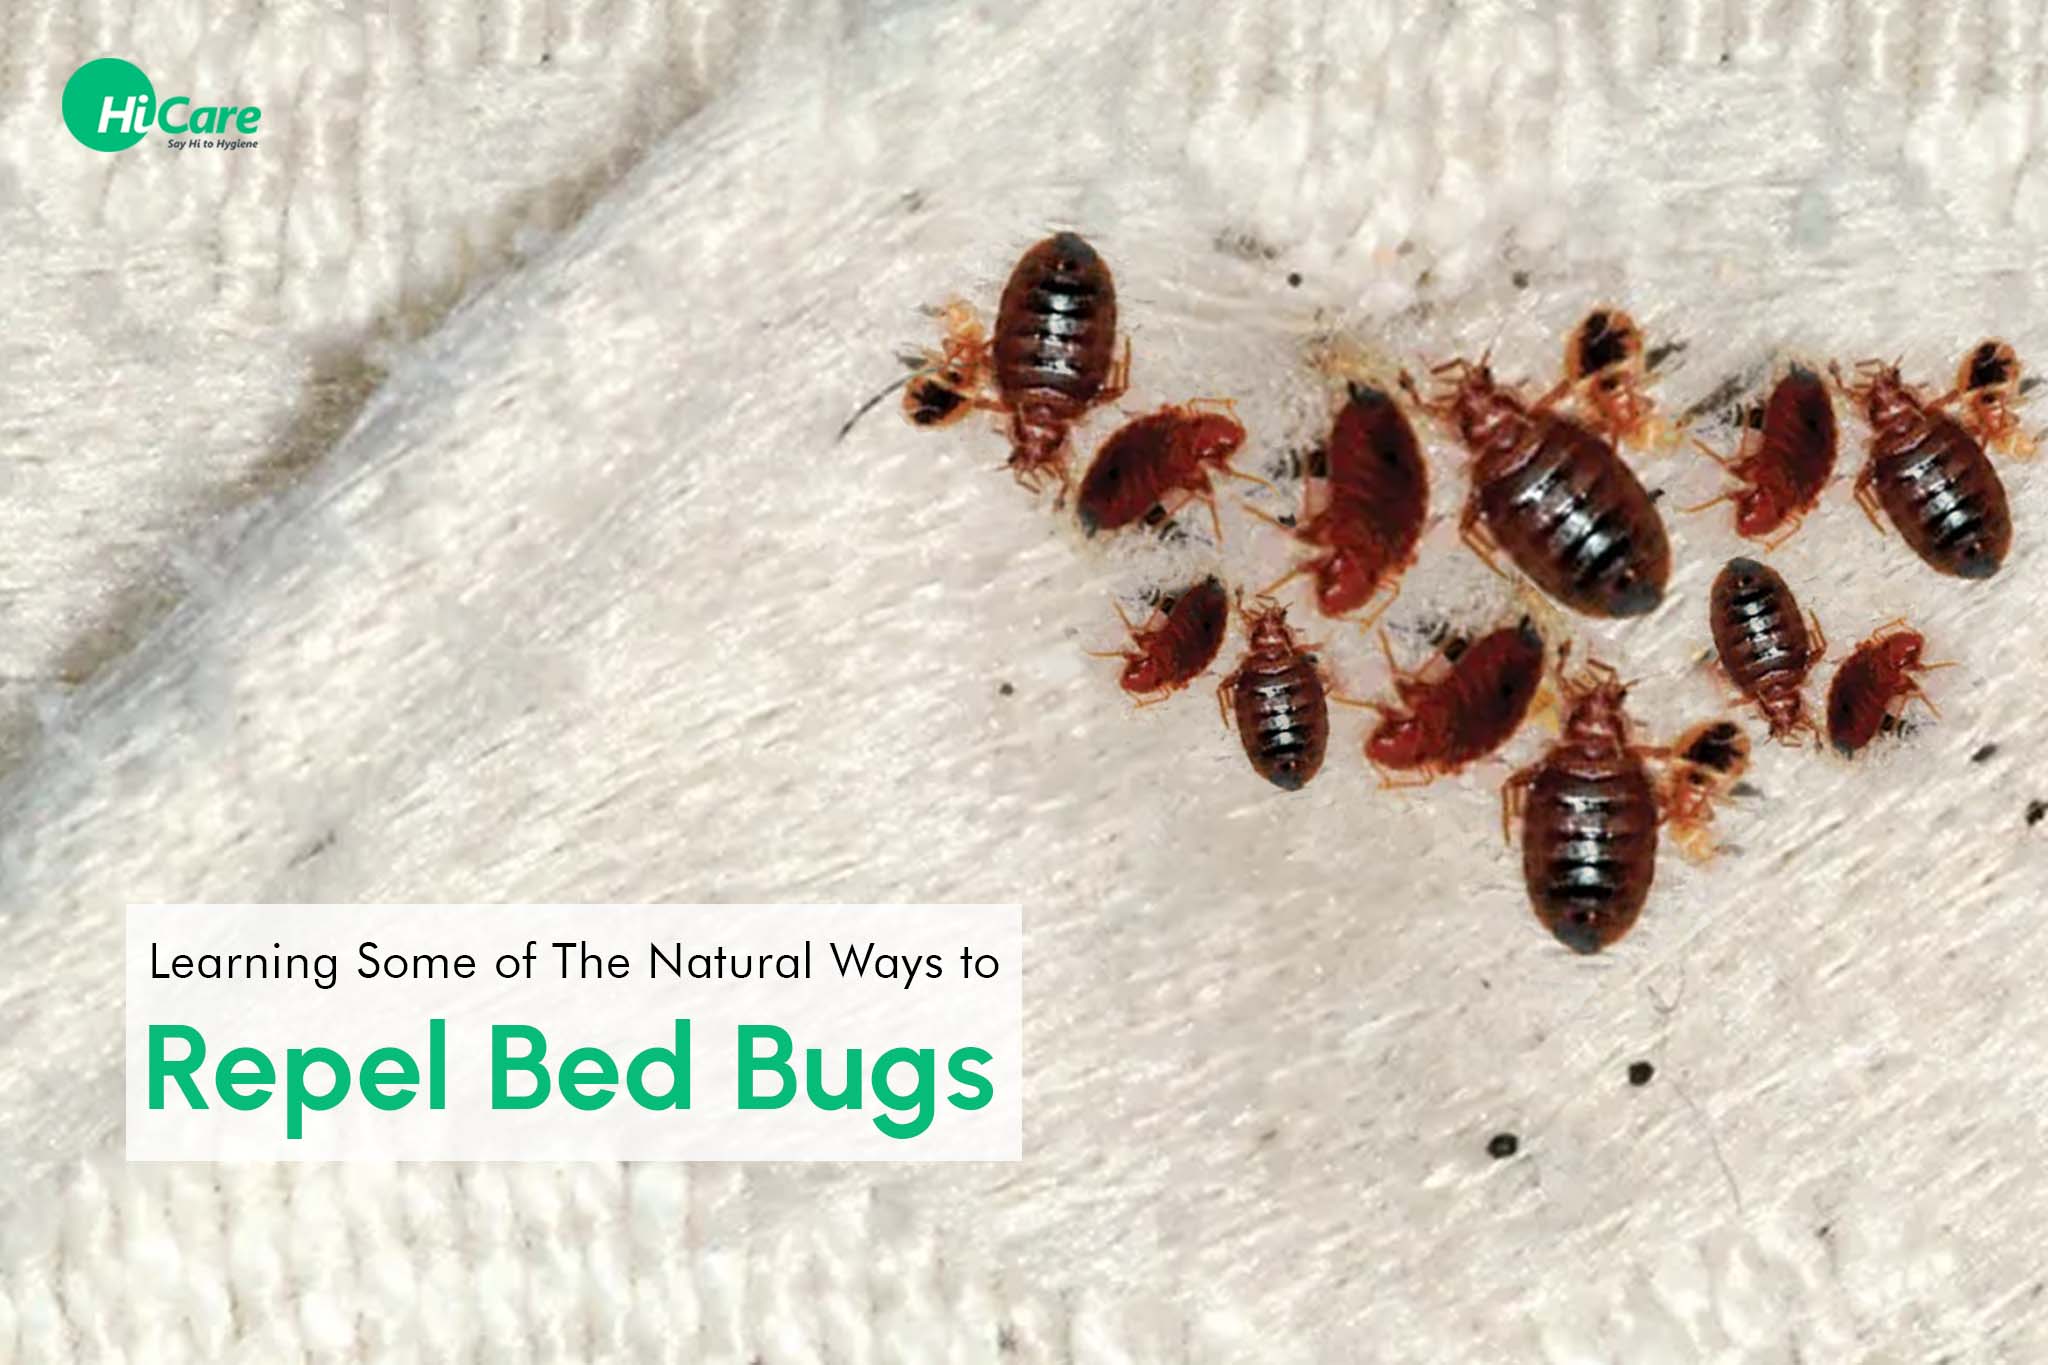 How to Not Get Bed Bugs from Someone?